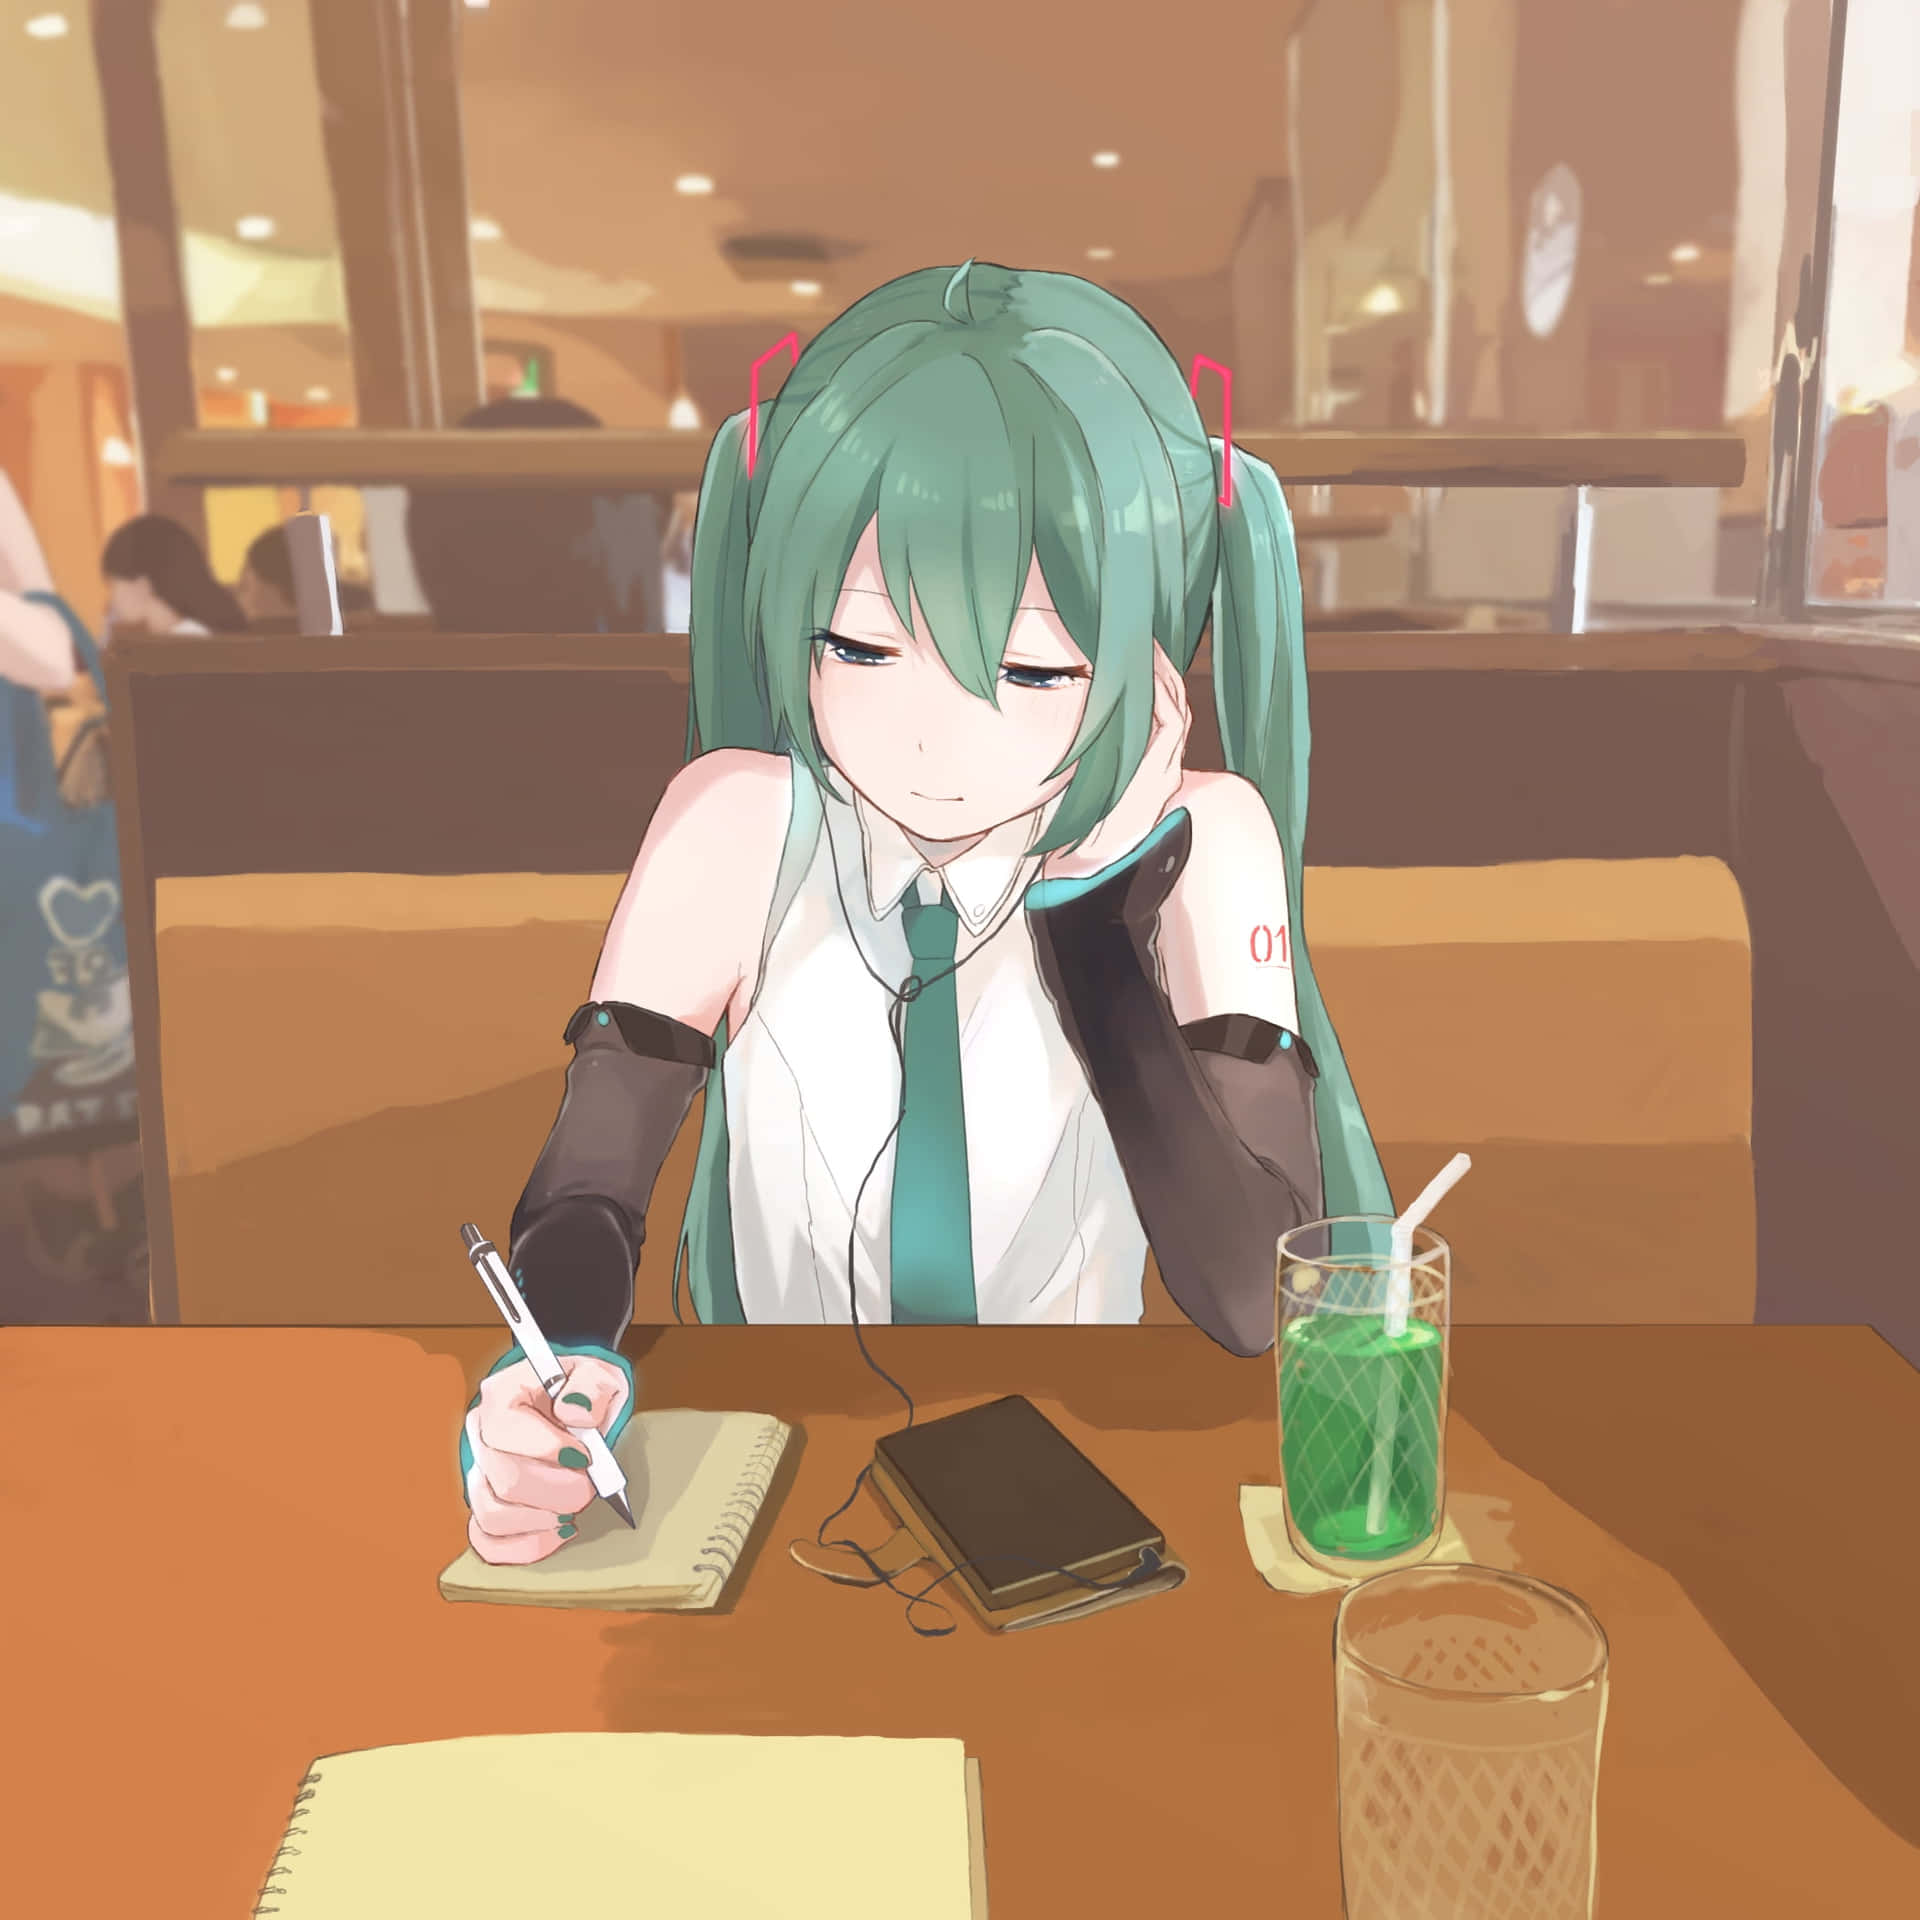 Come to Cafe Anime for a blissful experience! Wallpaper